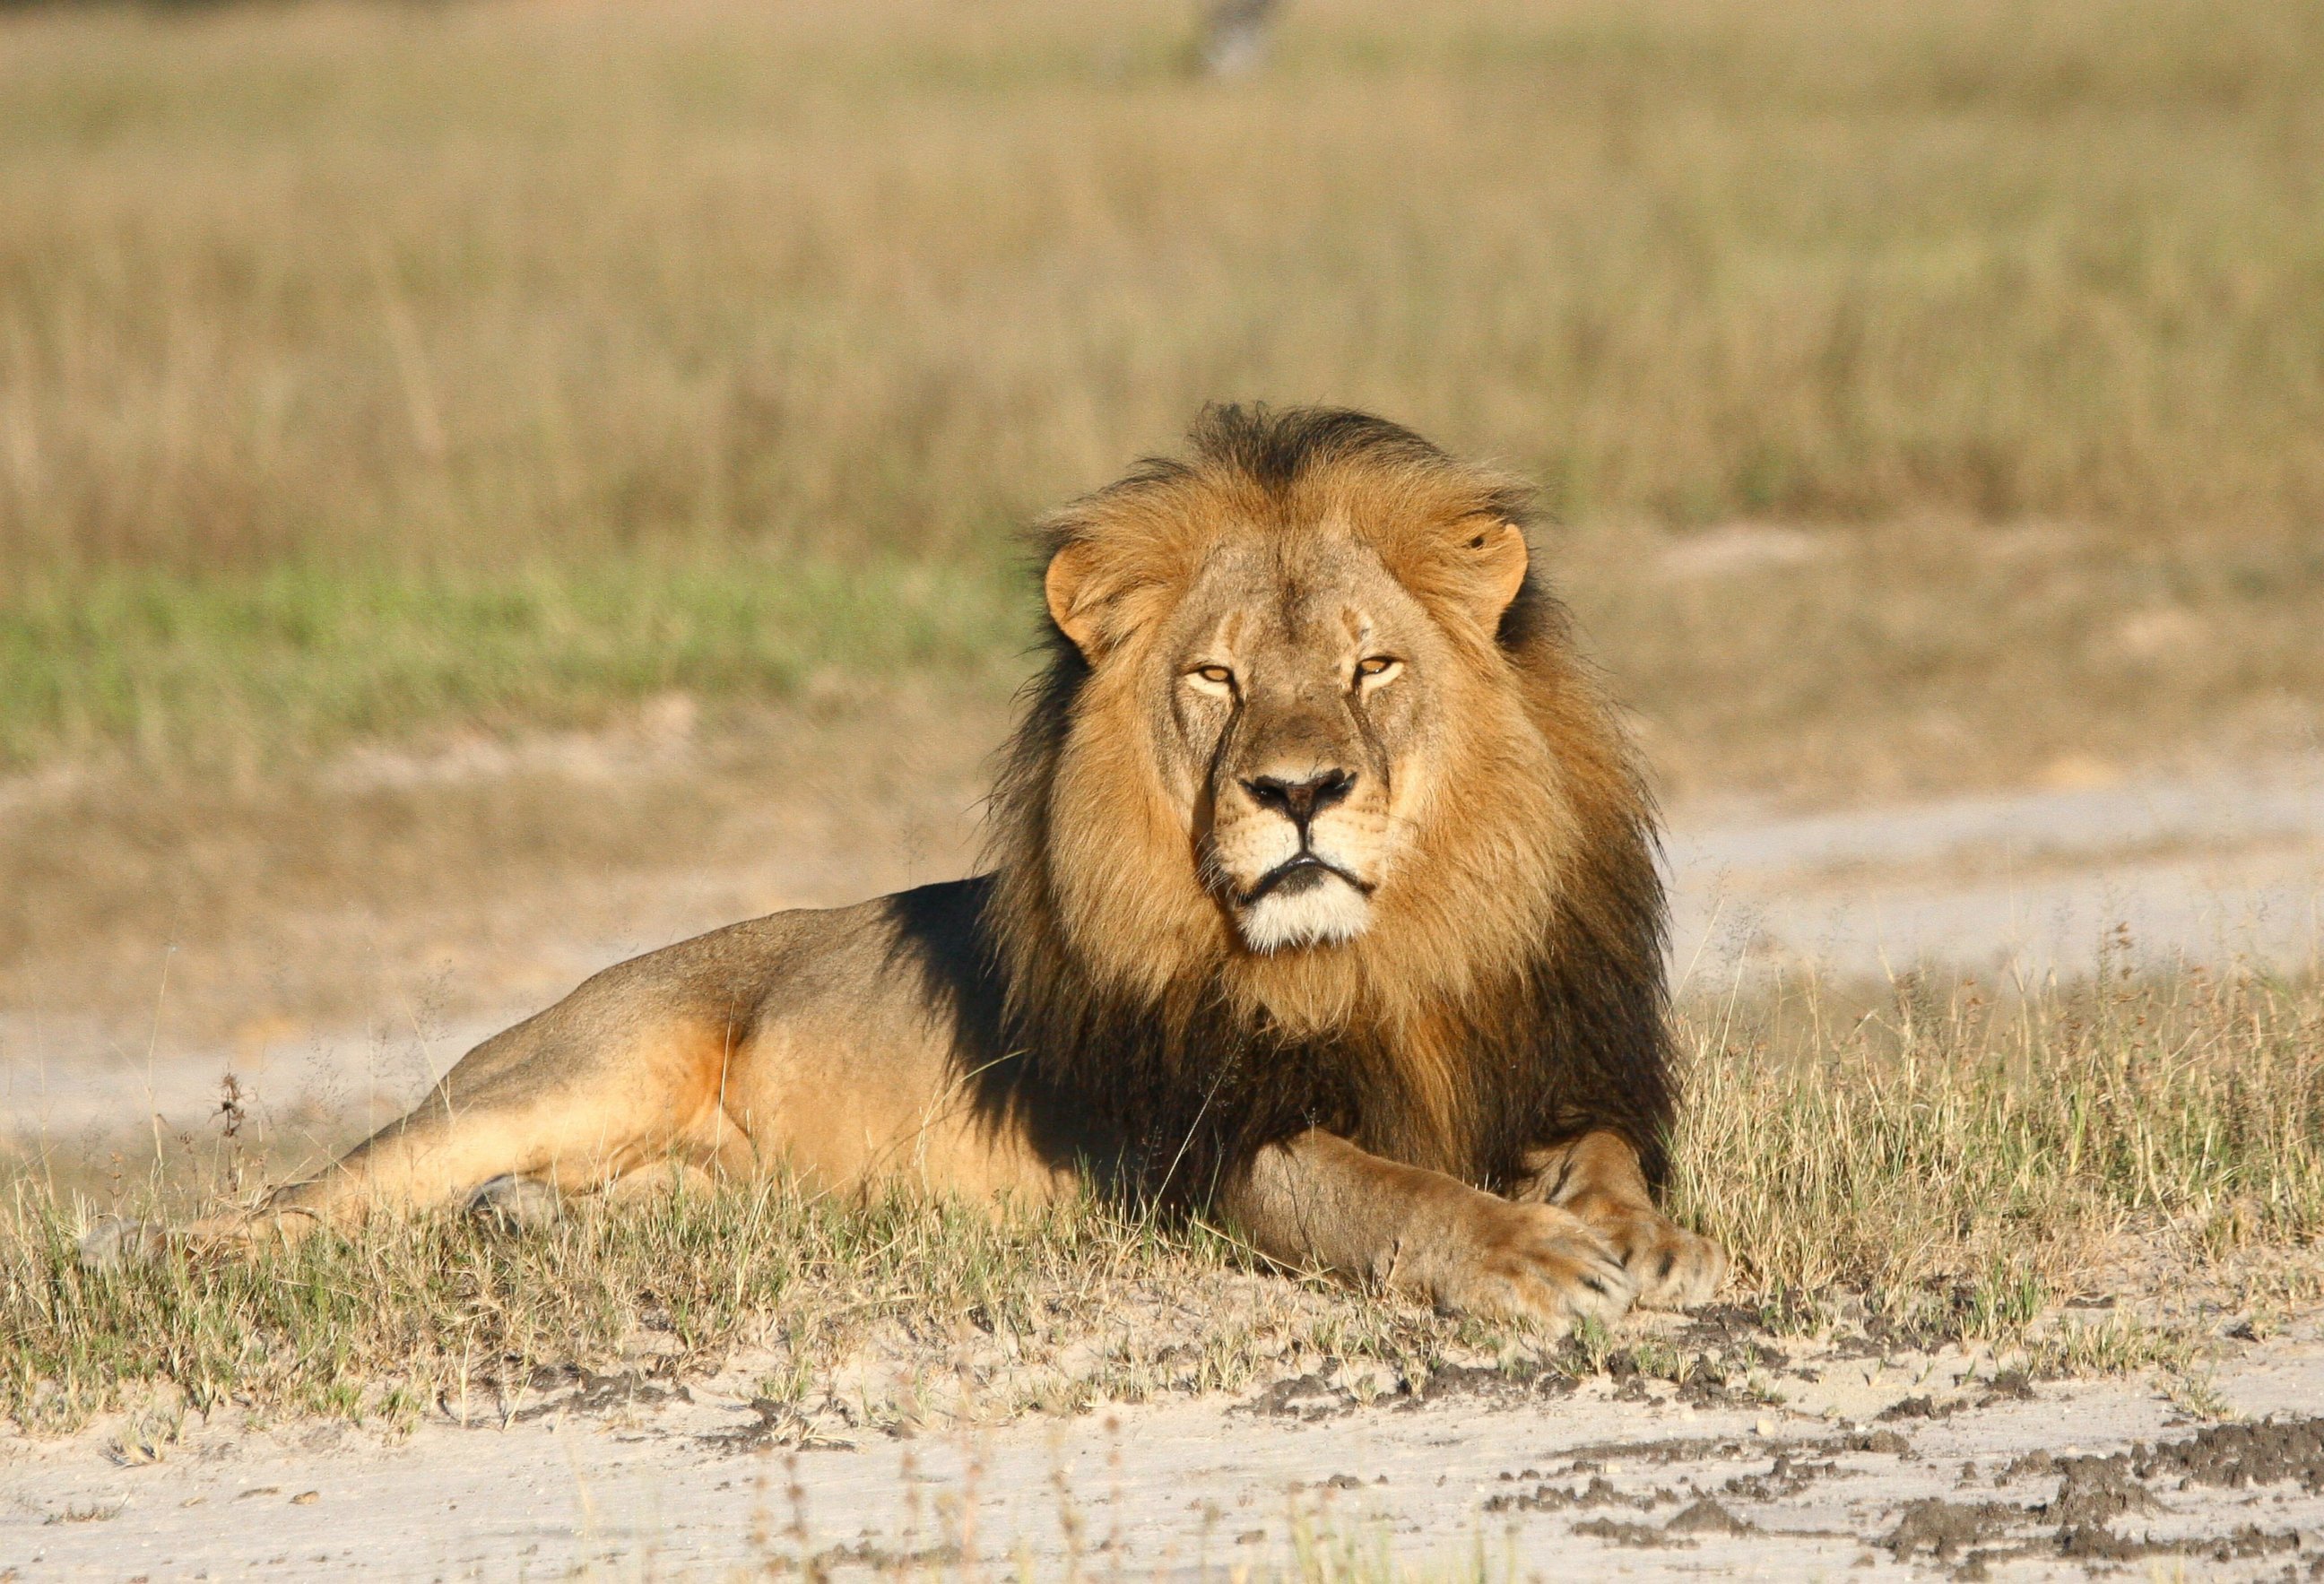 PHOTO: In this undated photo provided by the Wildlife Conservation Research Unit, Cecil the lion rests in Hwange National Park, in Hwange, Zimbabwe.